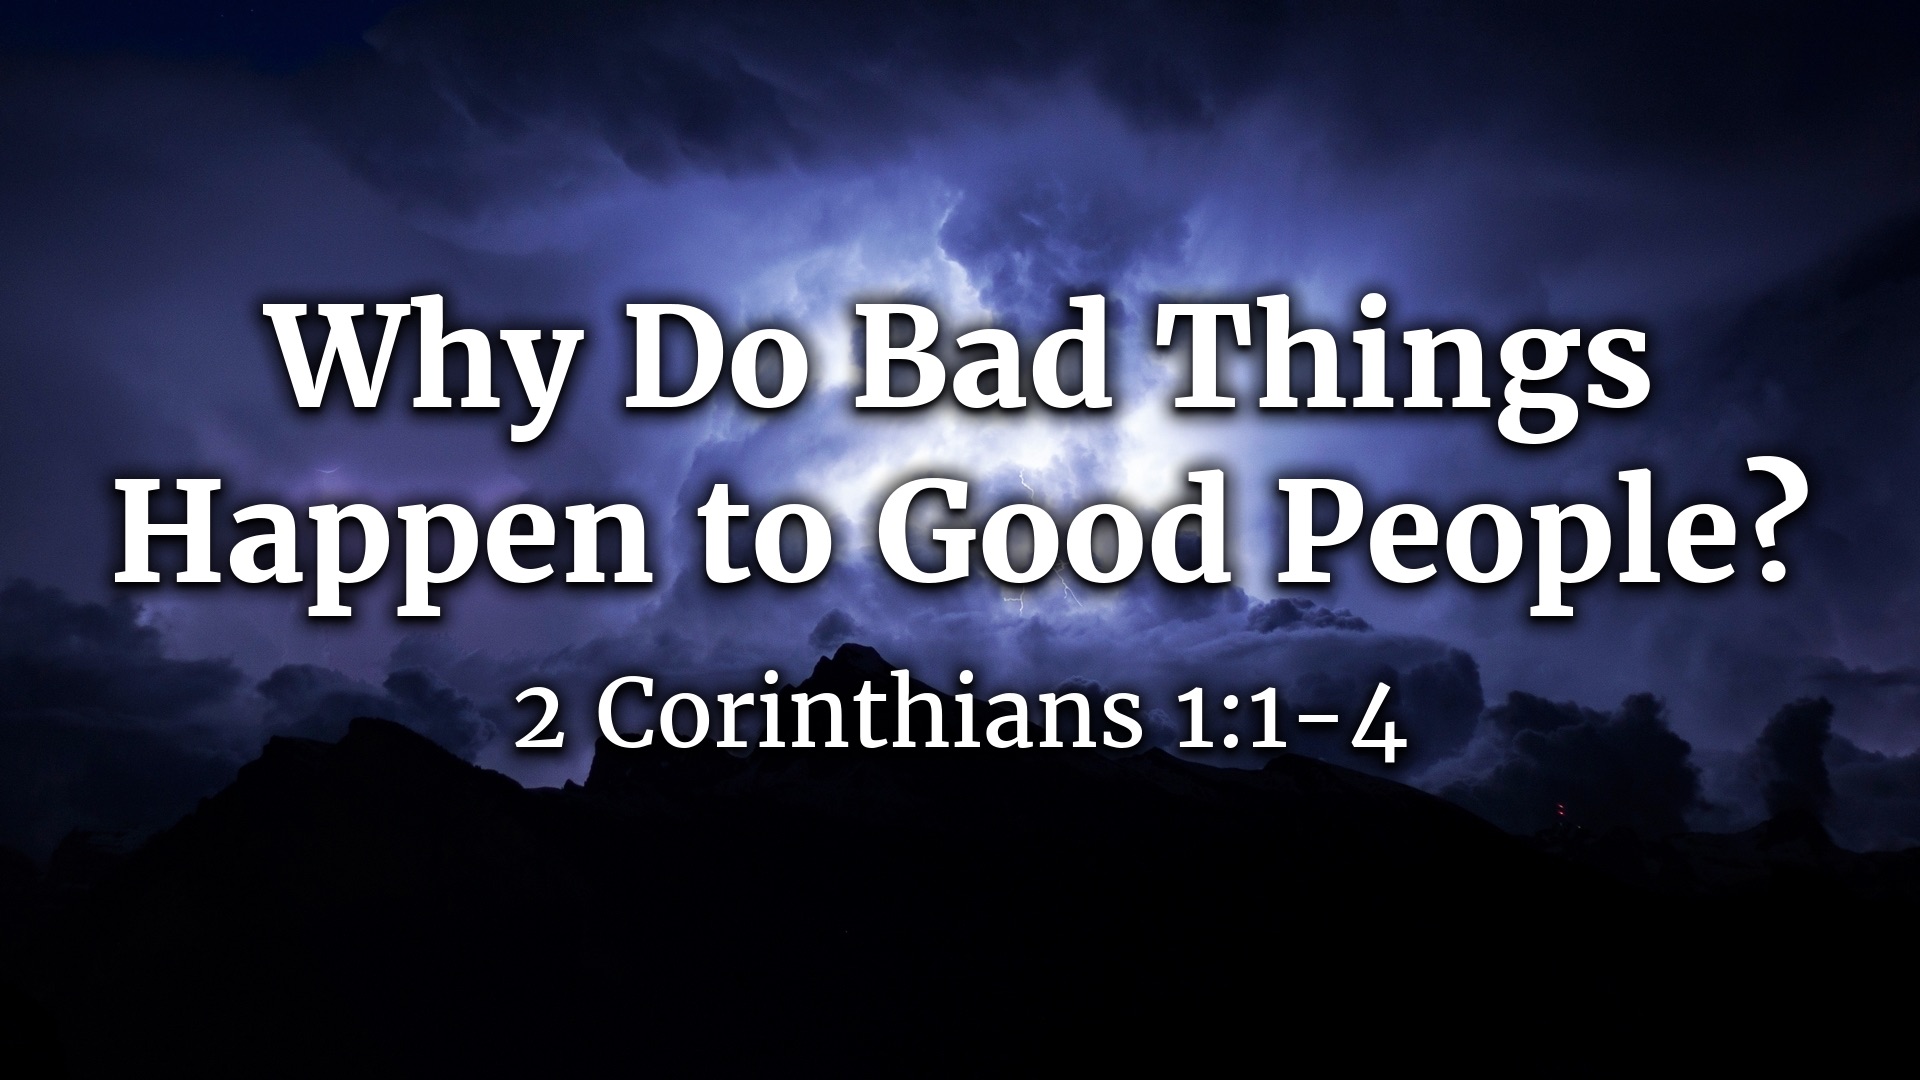 Why Do Bad Things Happen to Good People? Oct. 31st, 2021 Logos Sermons